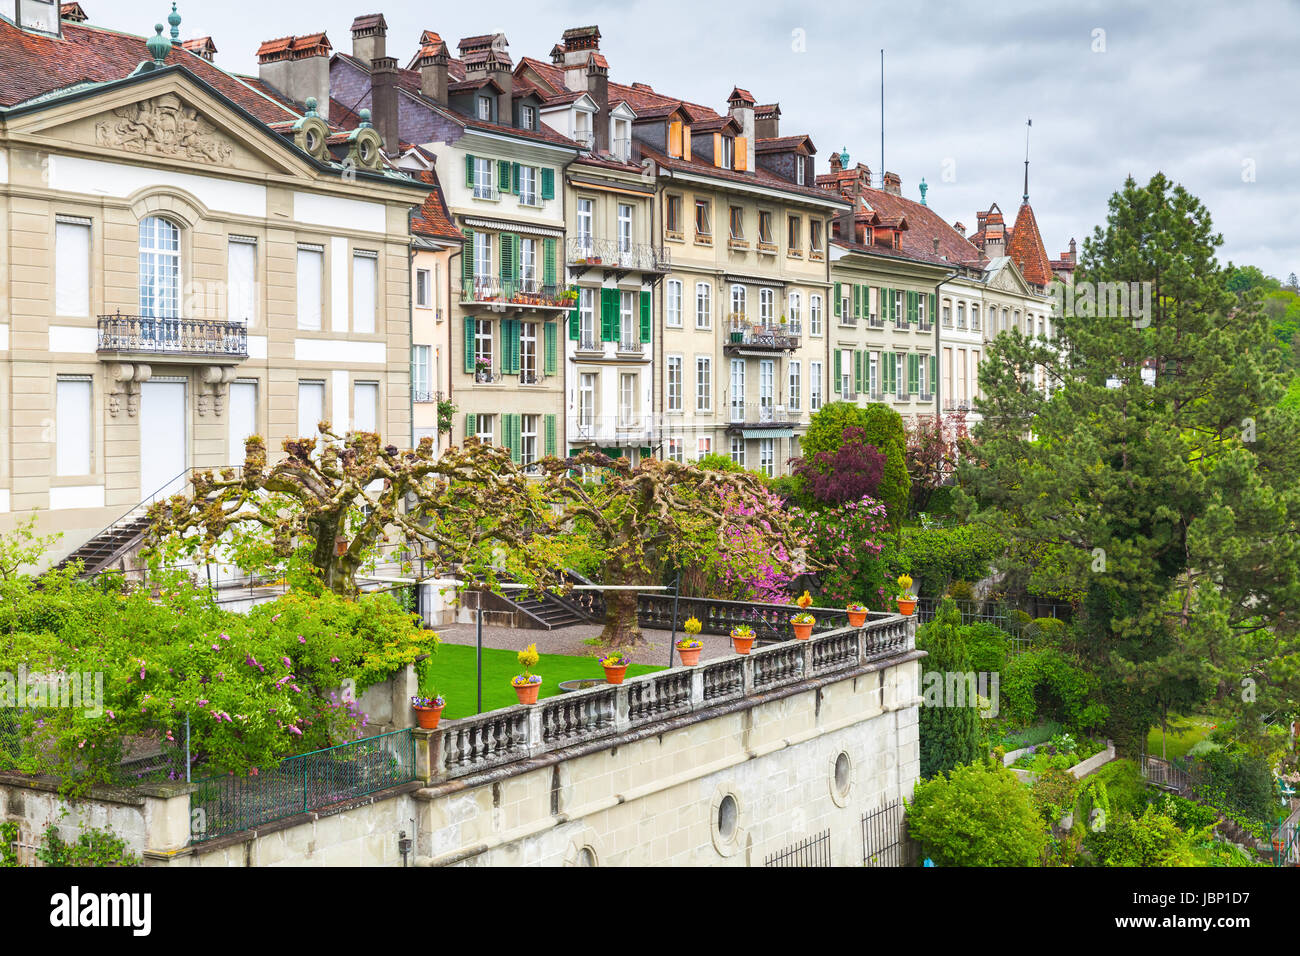 Bern old town, Switzerland. Landscape with old living houses and gardens Stock Photo